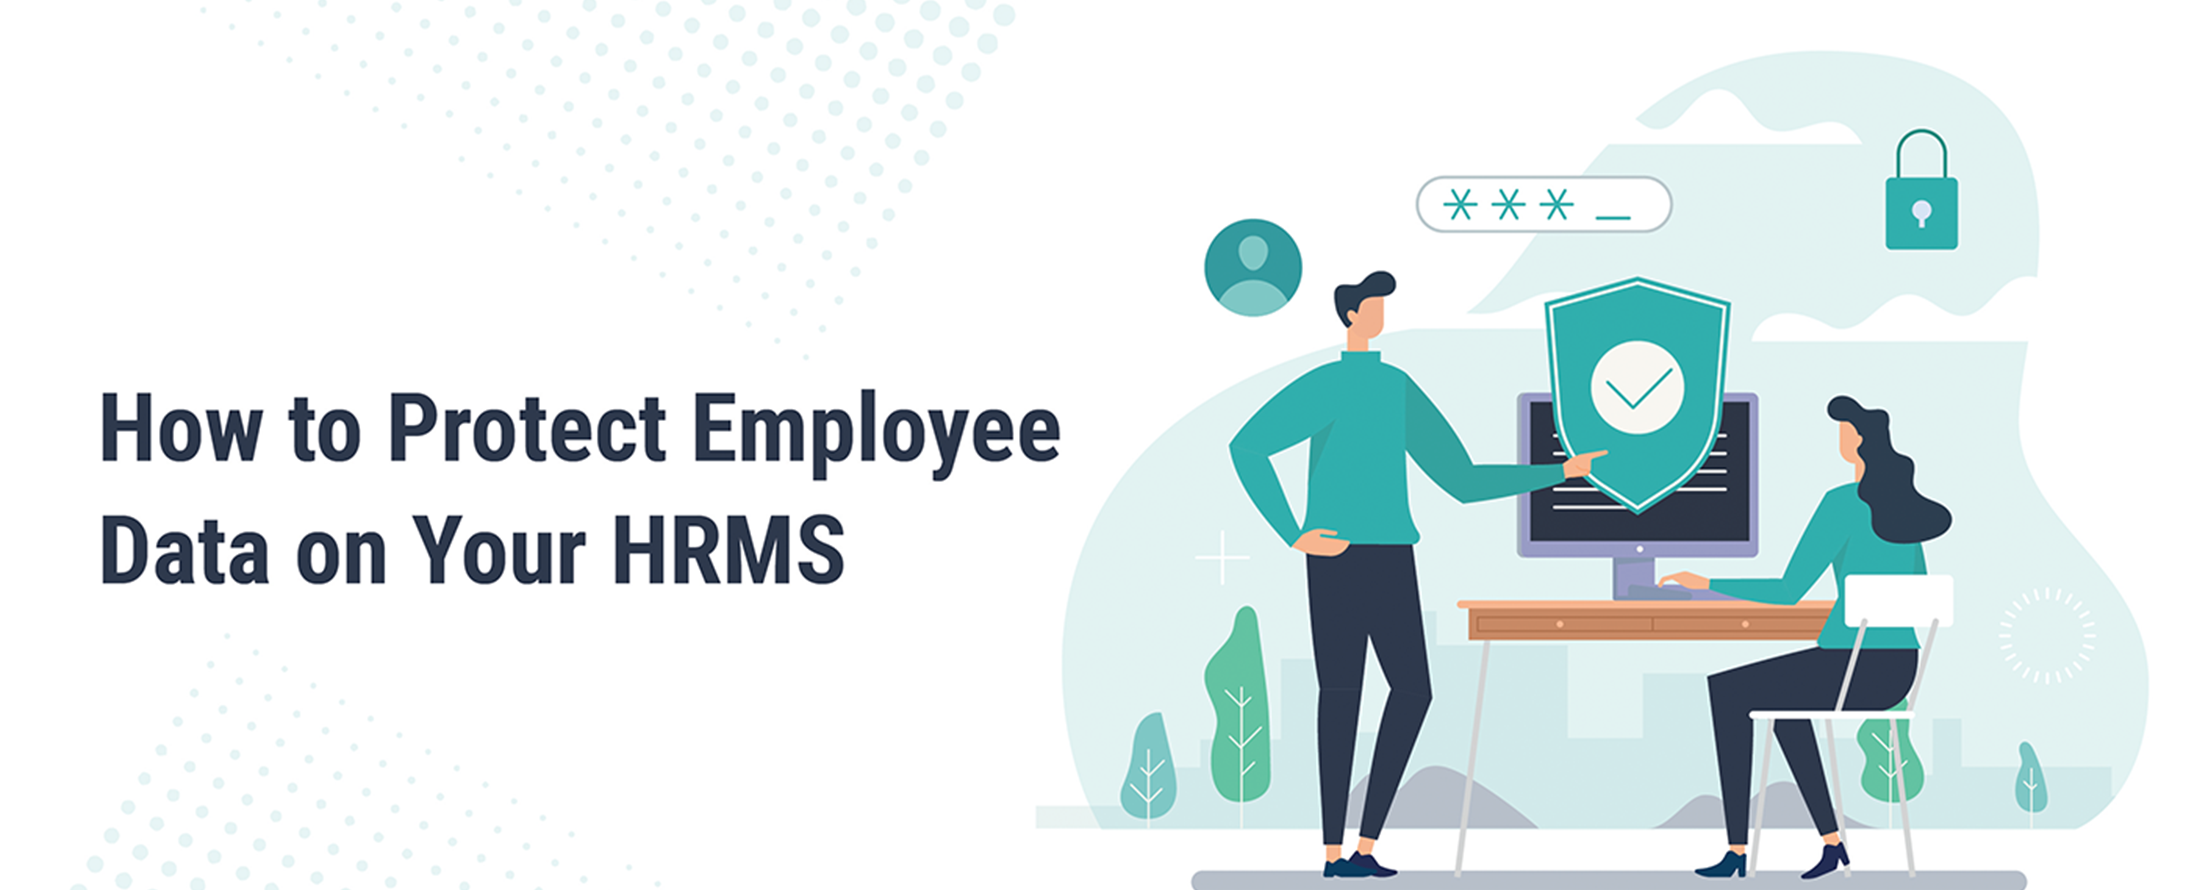 How to Protect Employee Data on Your HRMS